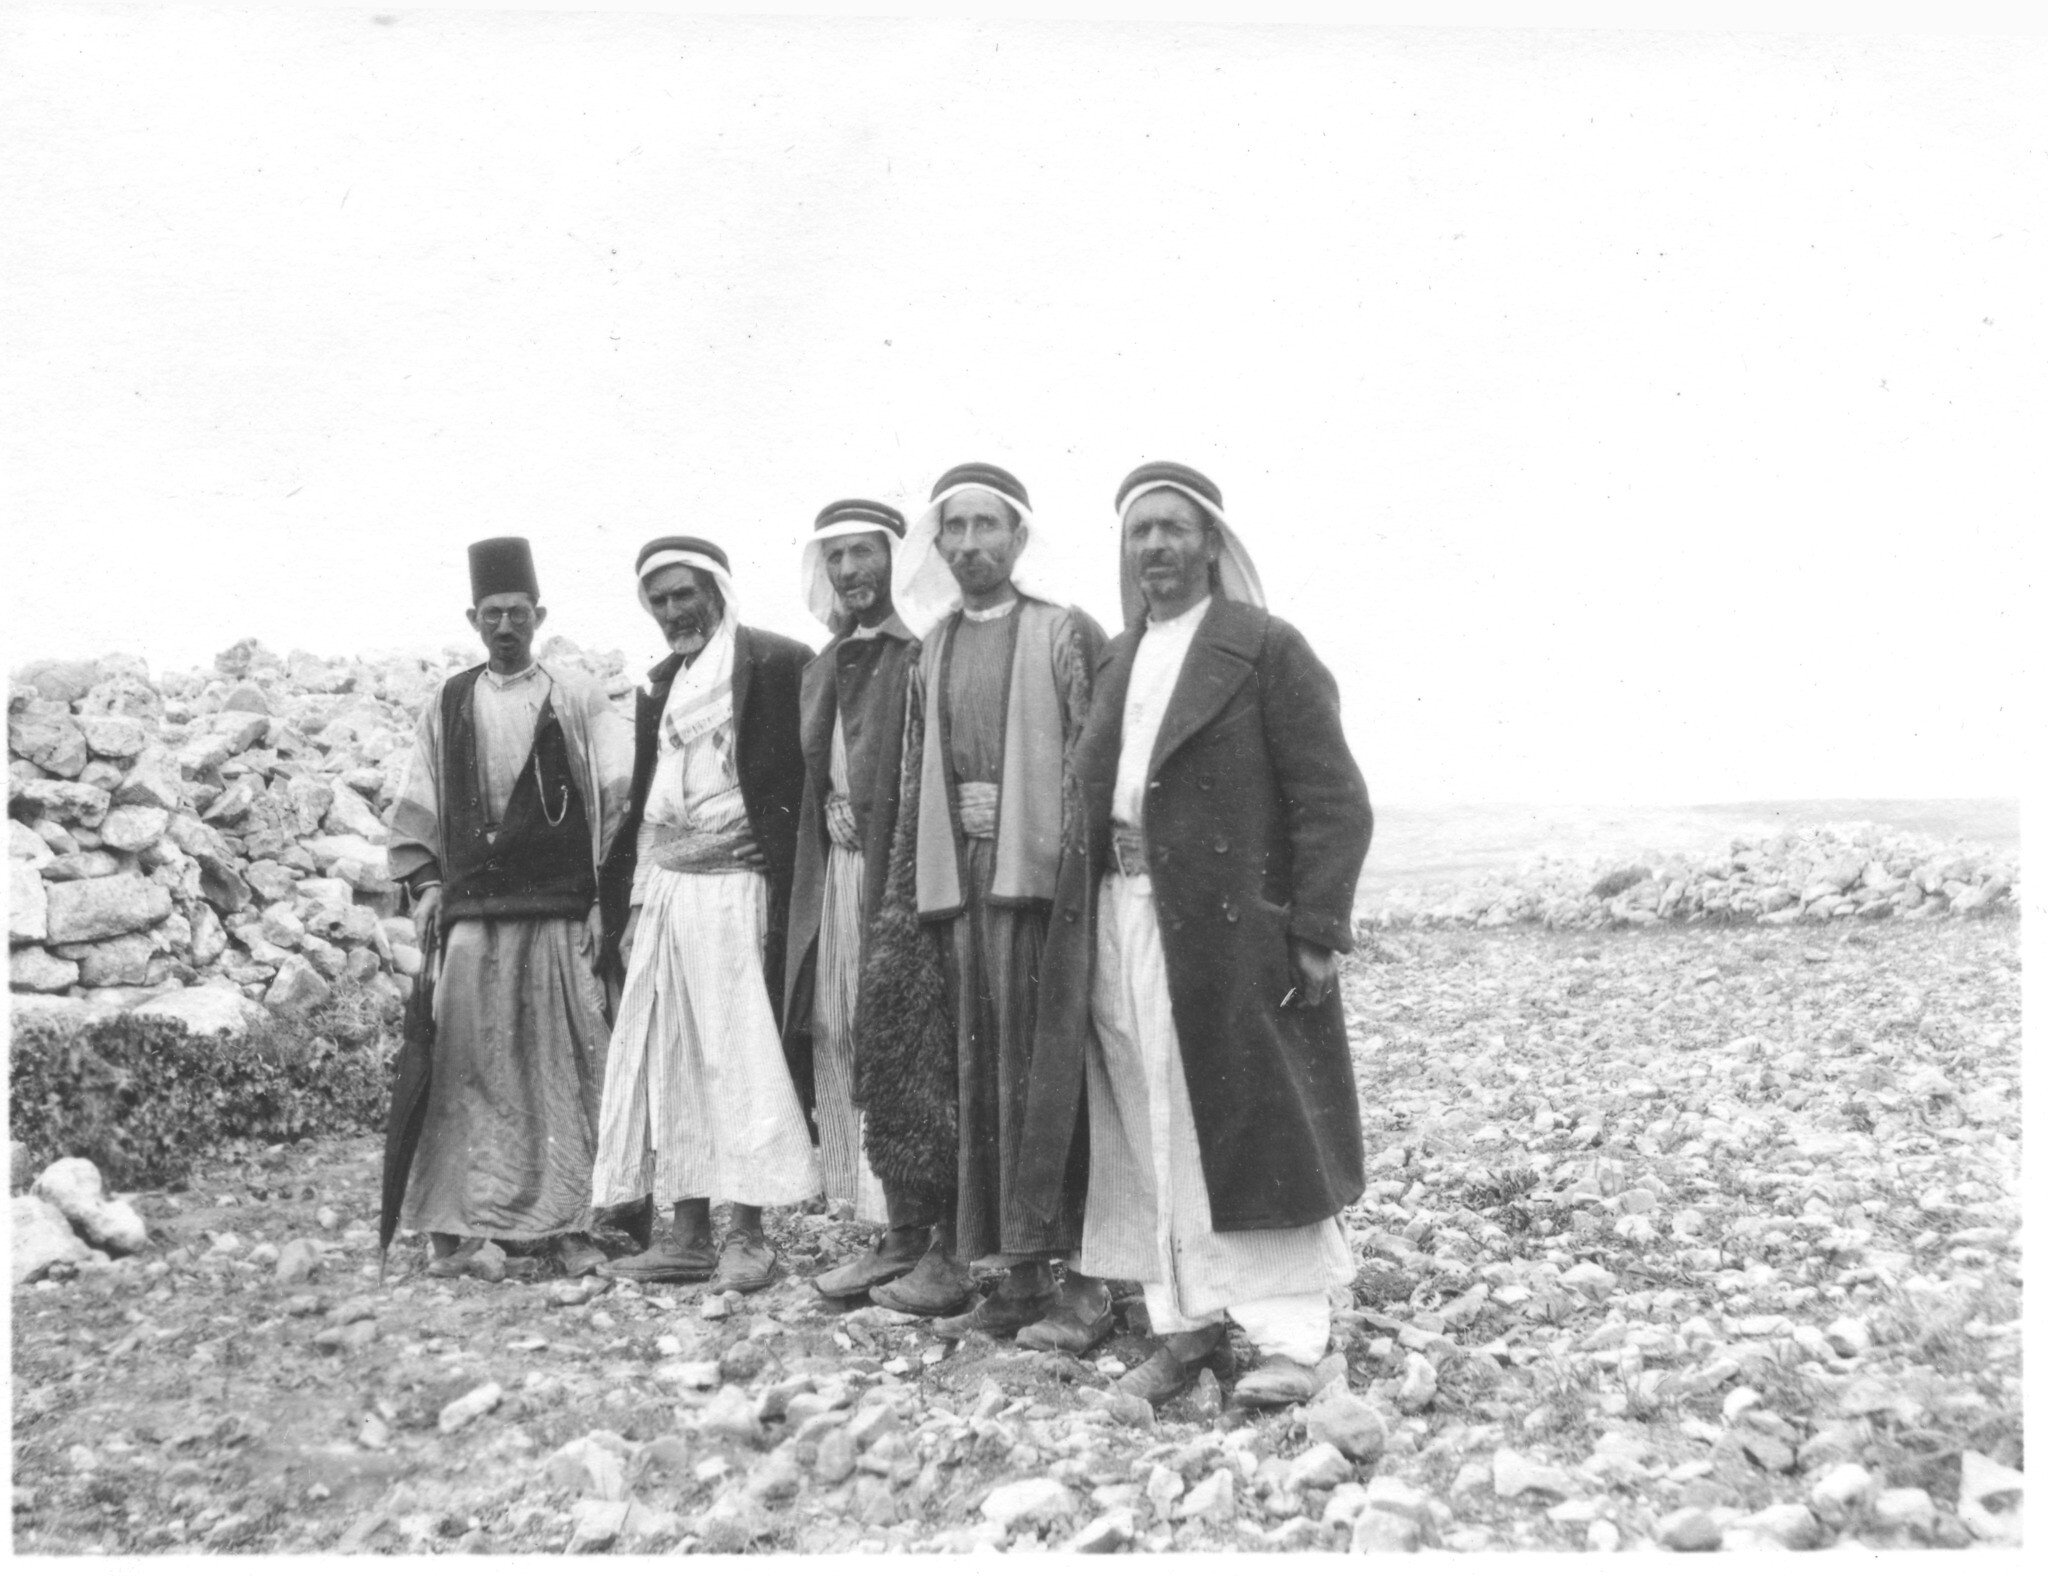 A group of landowners, pictured in 1929, who leased parcels of their properties at Tell en-Naṣbeh for excavation by W.F. Badè. (Courtesy of the Badè Museum/Pacific School of Religion)